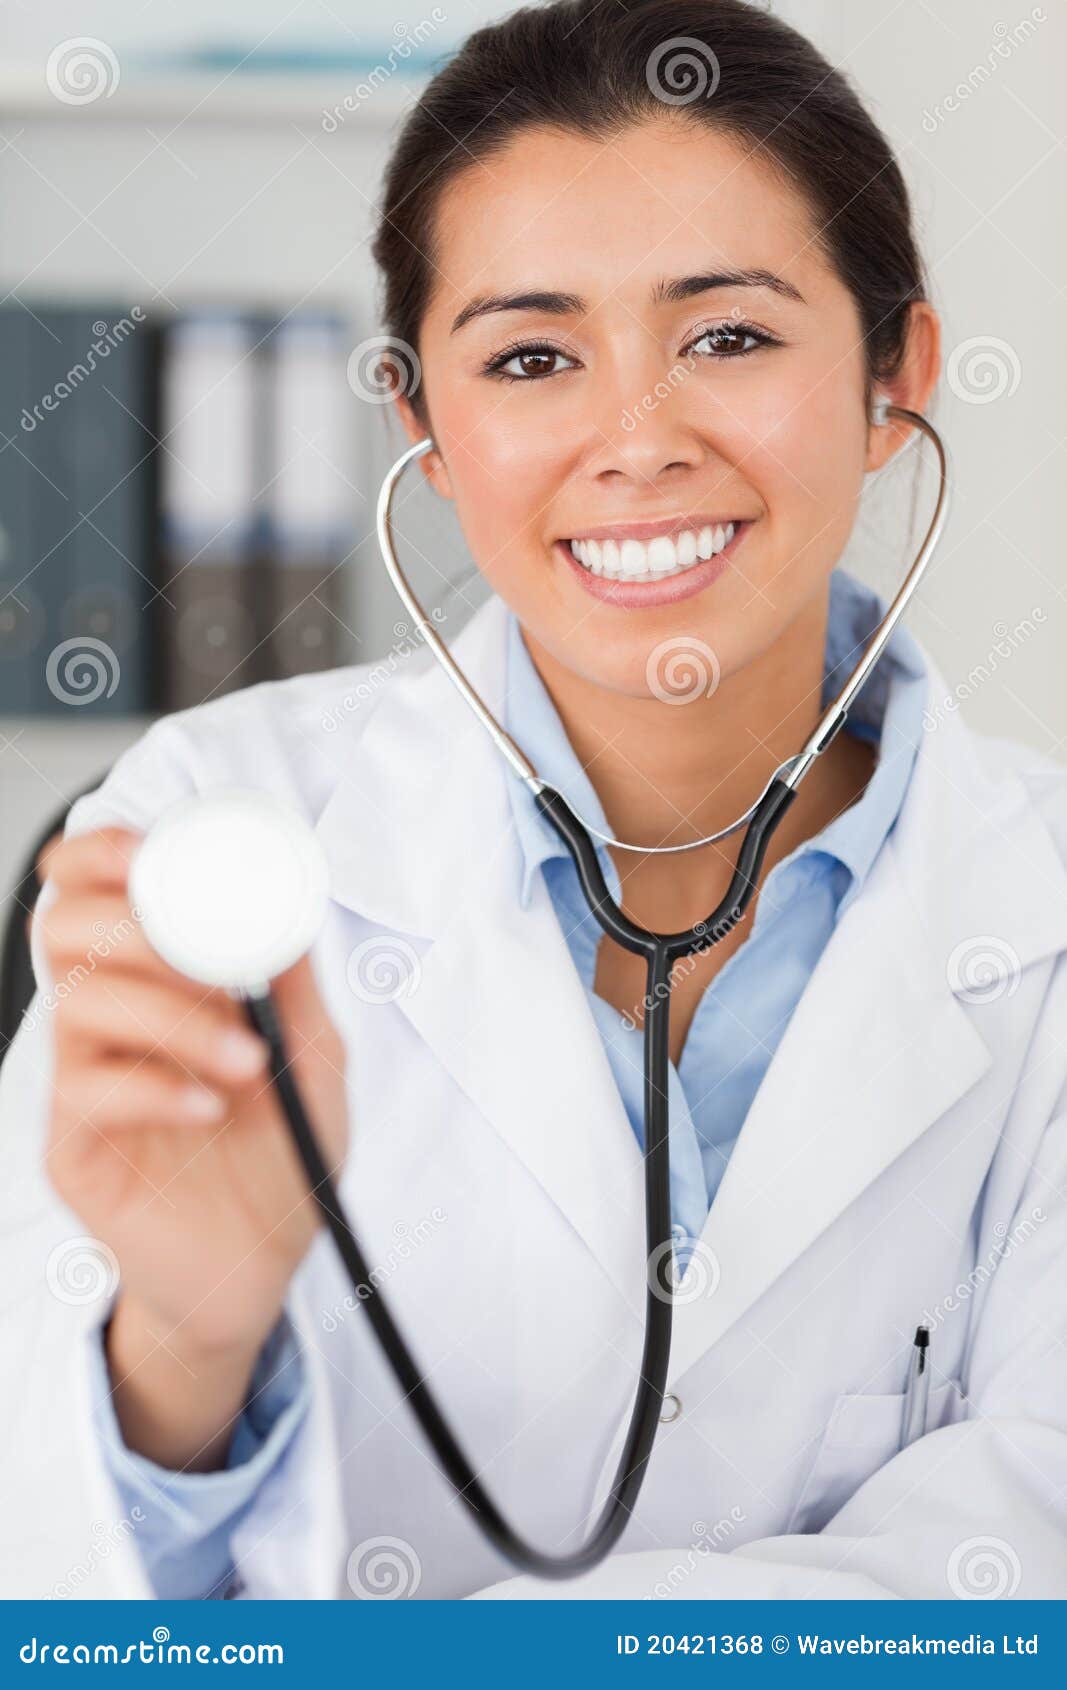 http://thumbs.dreamstime.com/z/good-looking-female-doctor-using-stethoscope-20421368.jpg